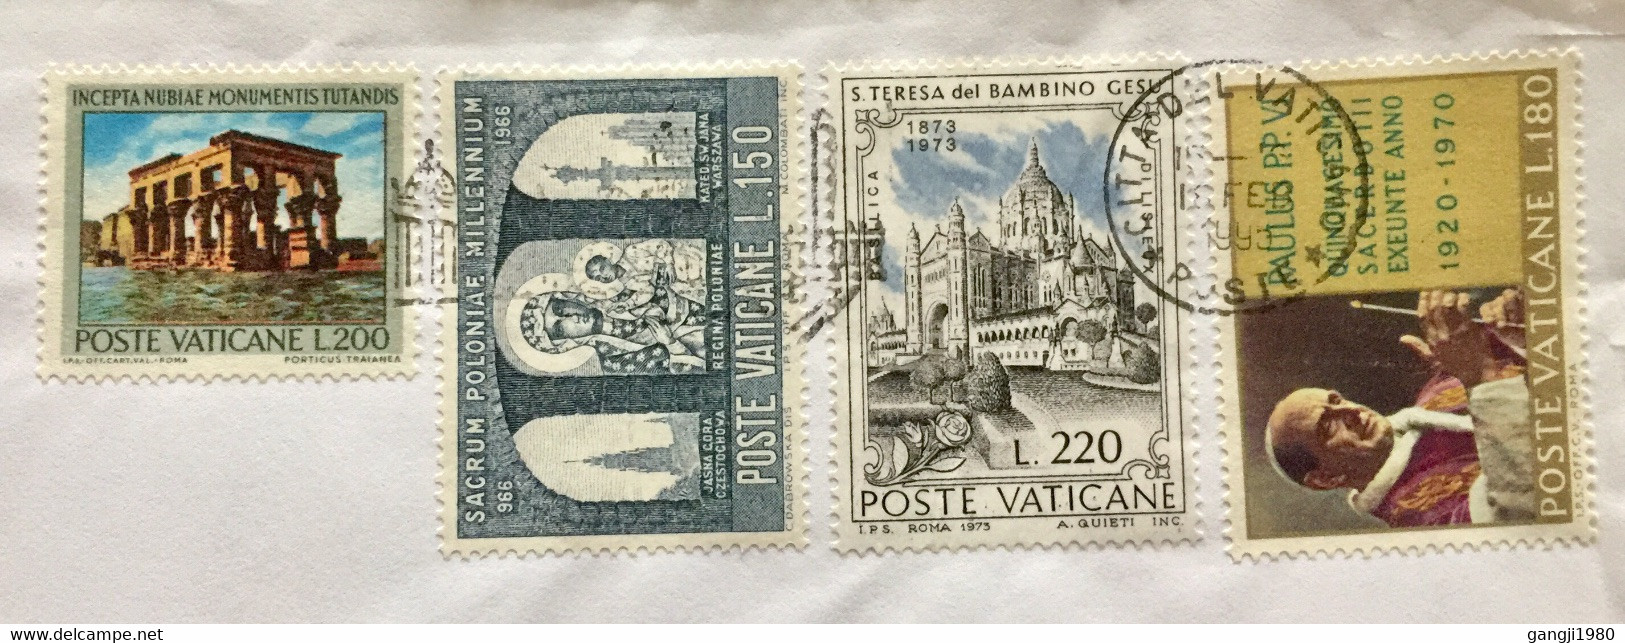 VATICAN 1995, MILITARY OF MALTA USED COVER !!! 4 STAMPS USED POPE ,VIEW OF VATICAN,MOTHER & CHILD EARLY RUIN, - Briefe U. Dokumente